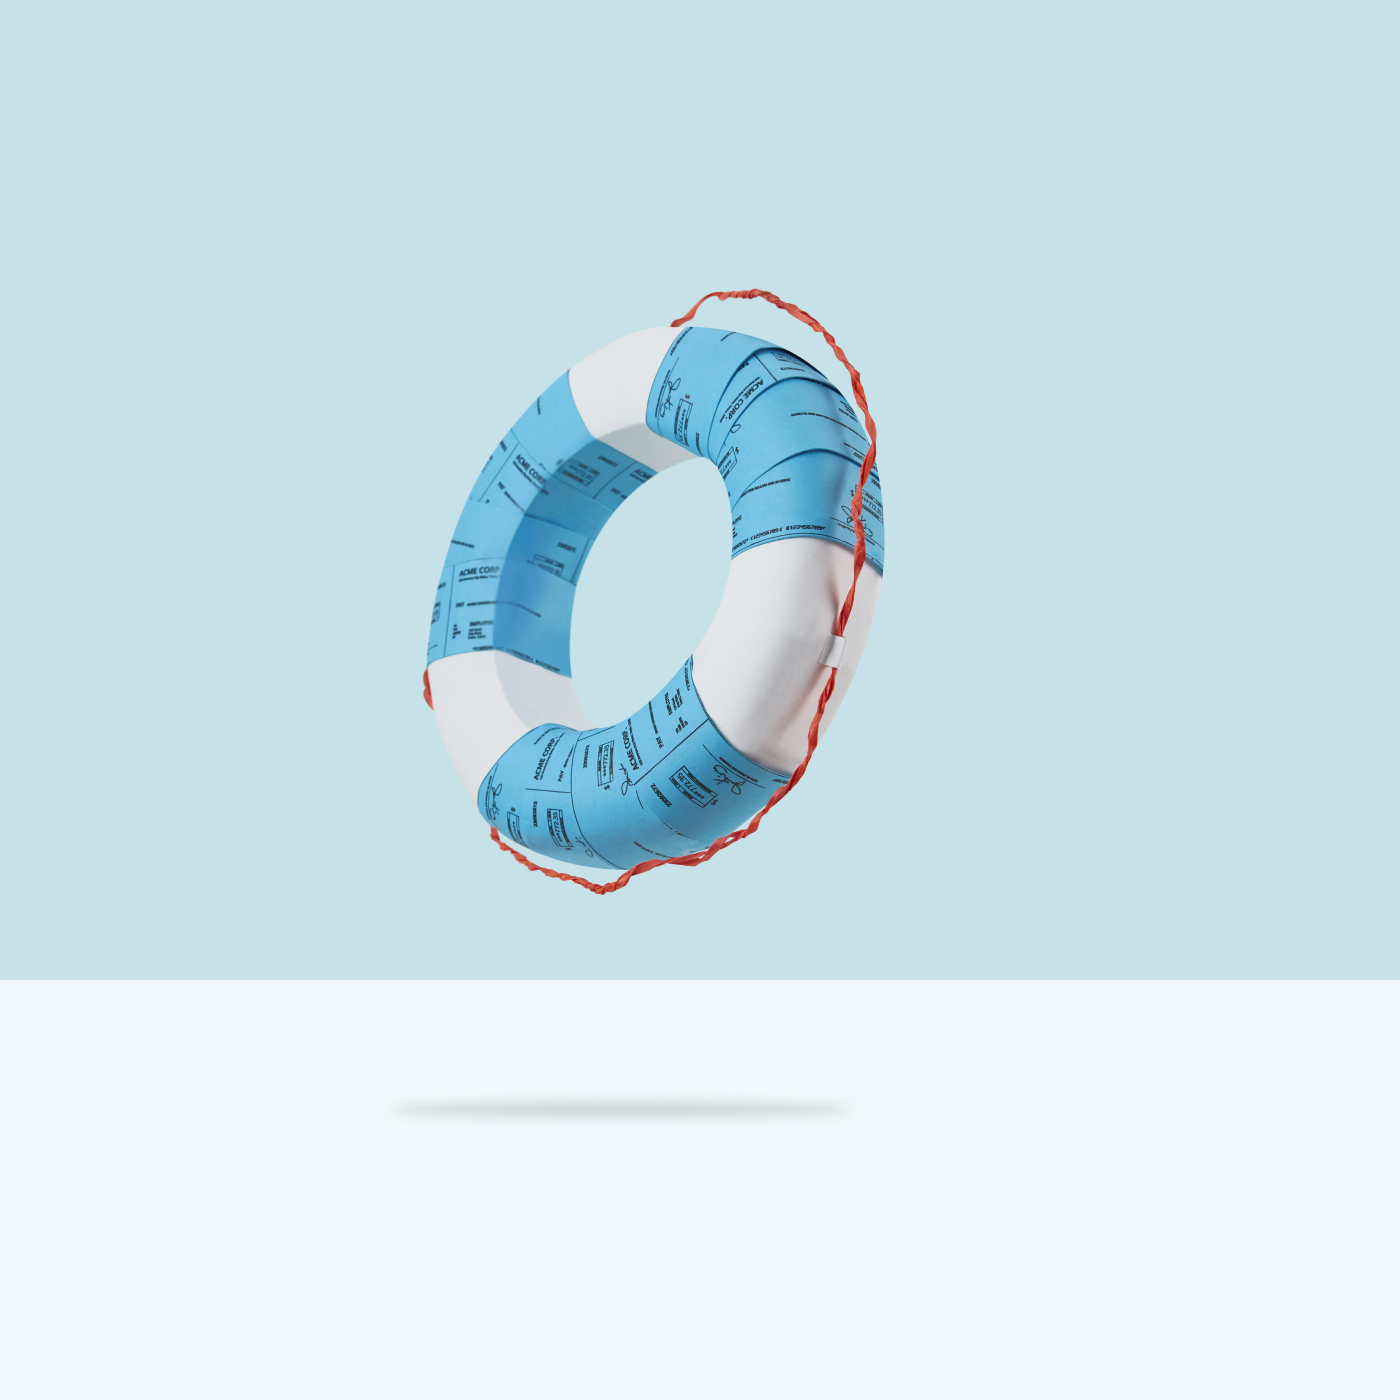 Paper illustration of a life ring created from checks